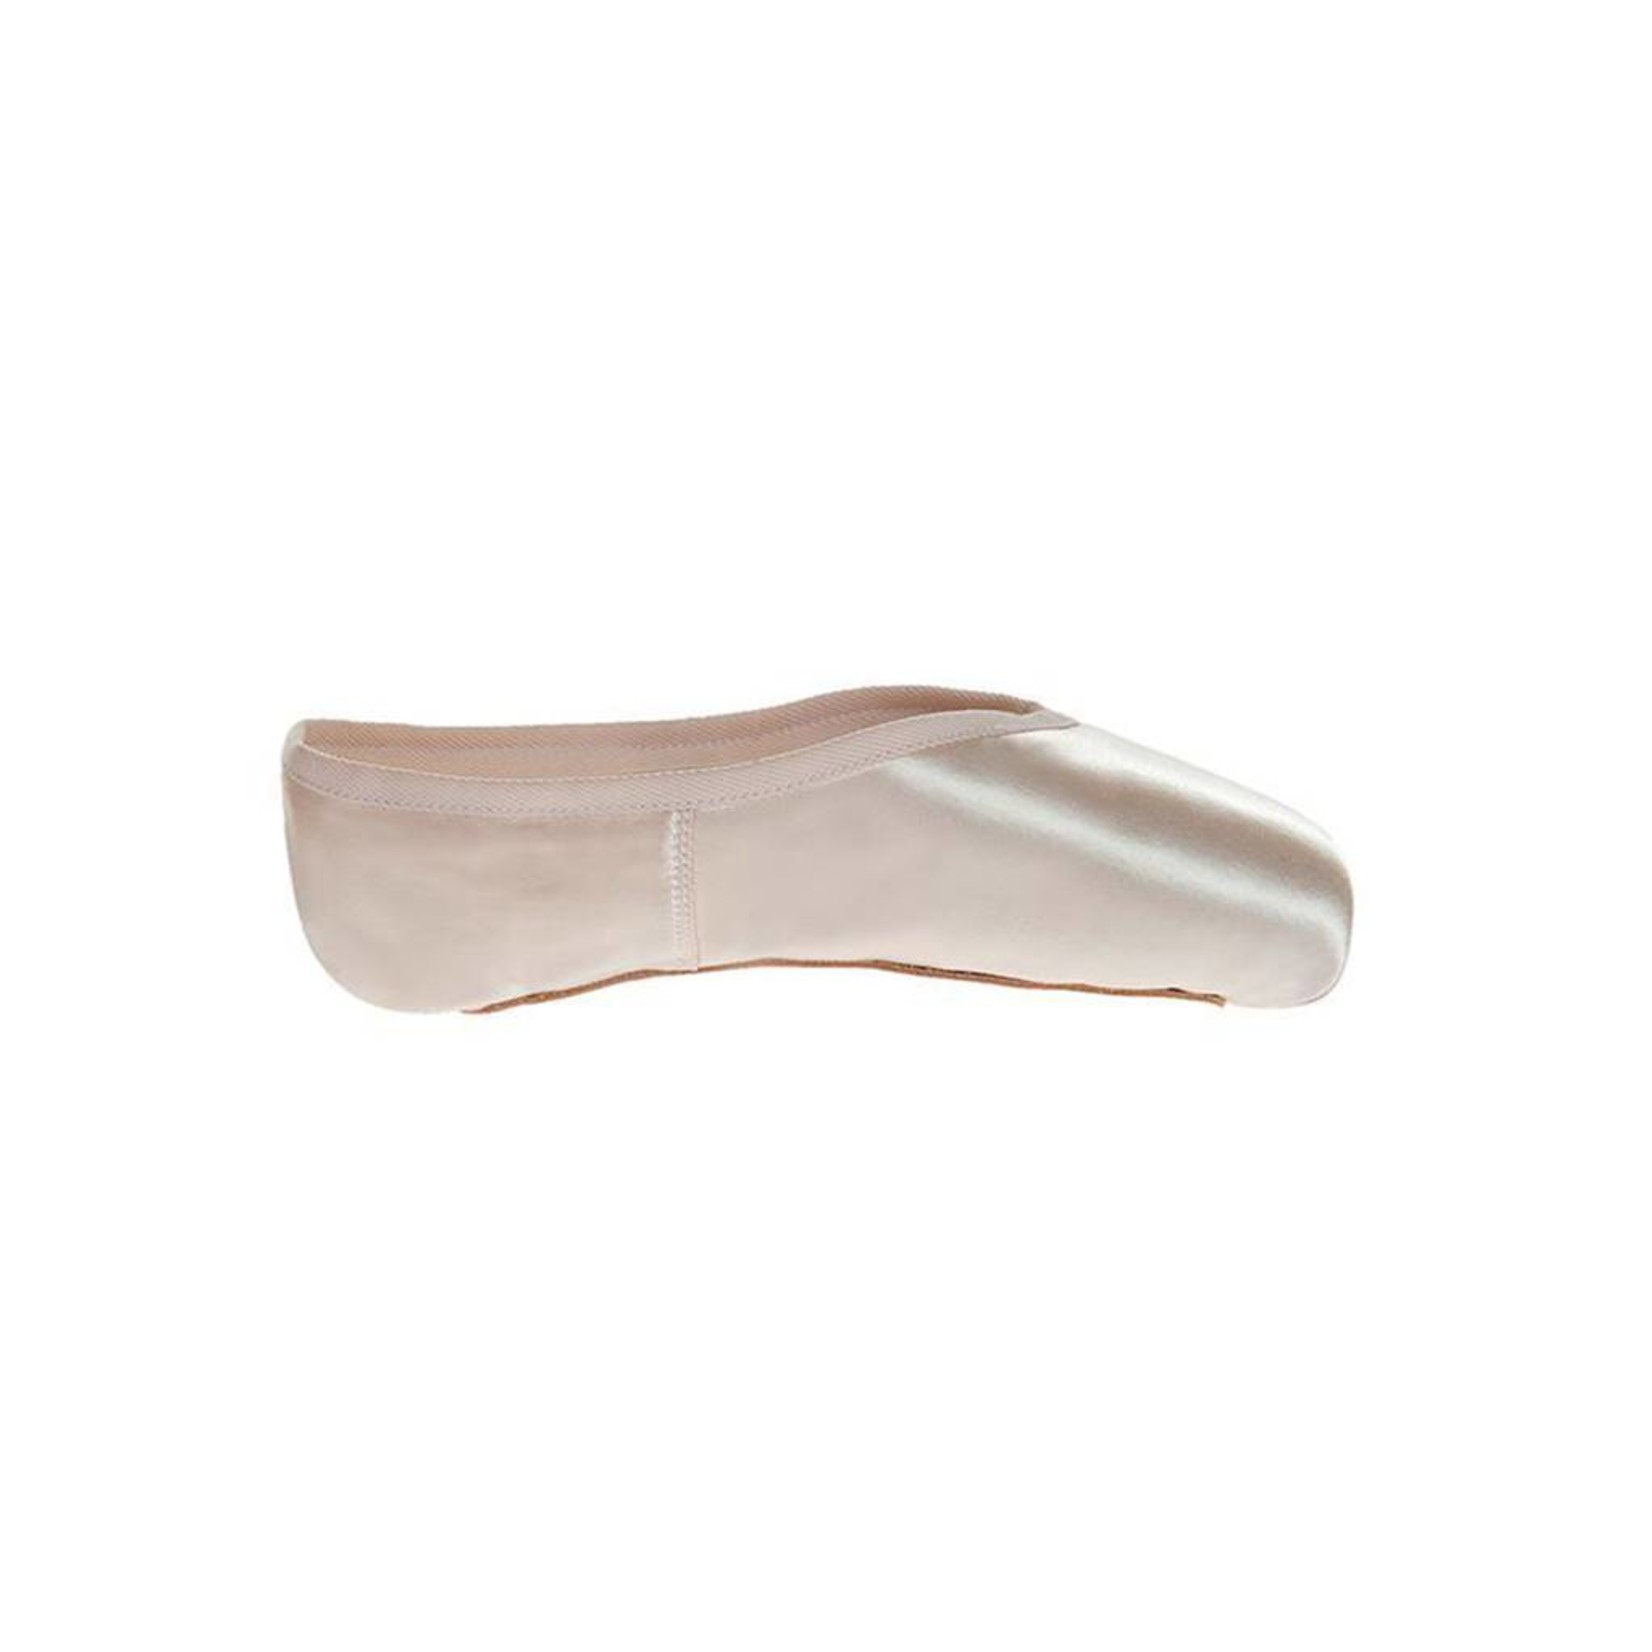 Russian Pointe Size 34: Muse V-Cut